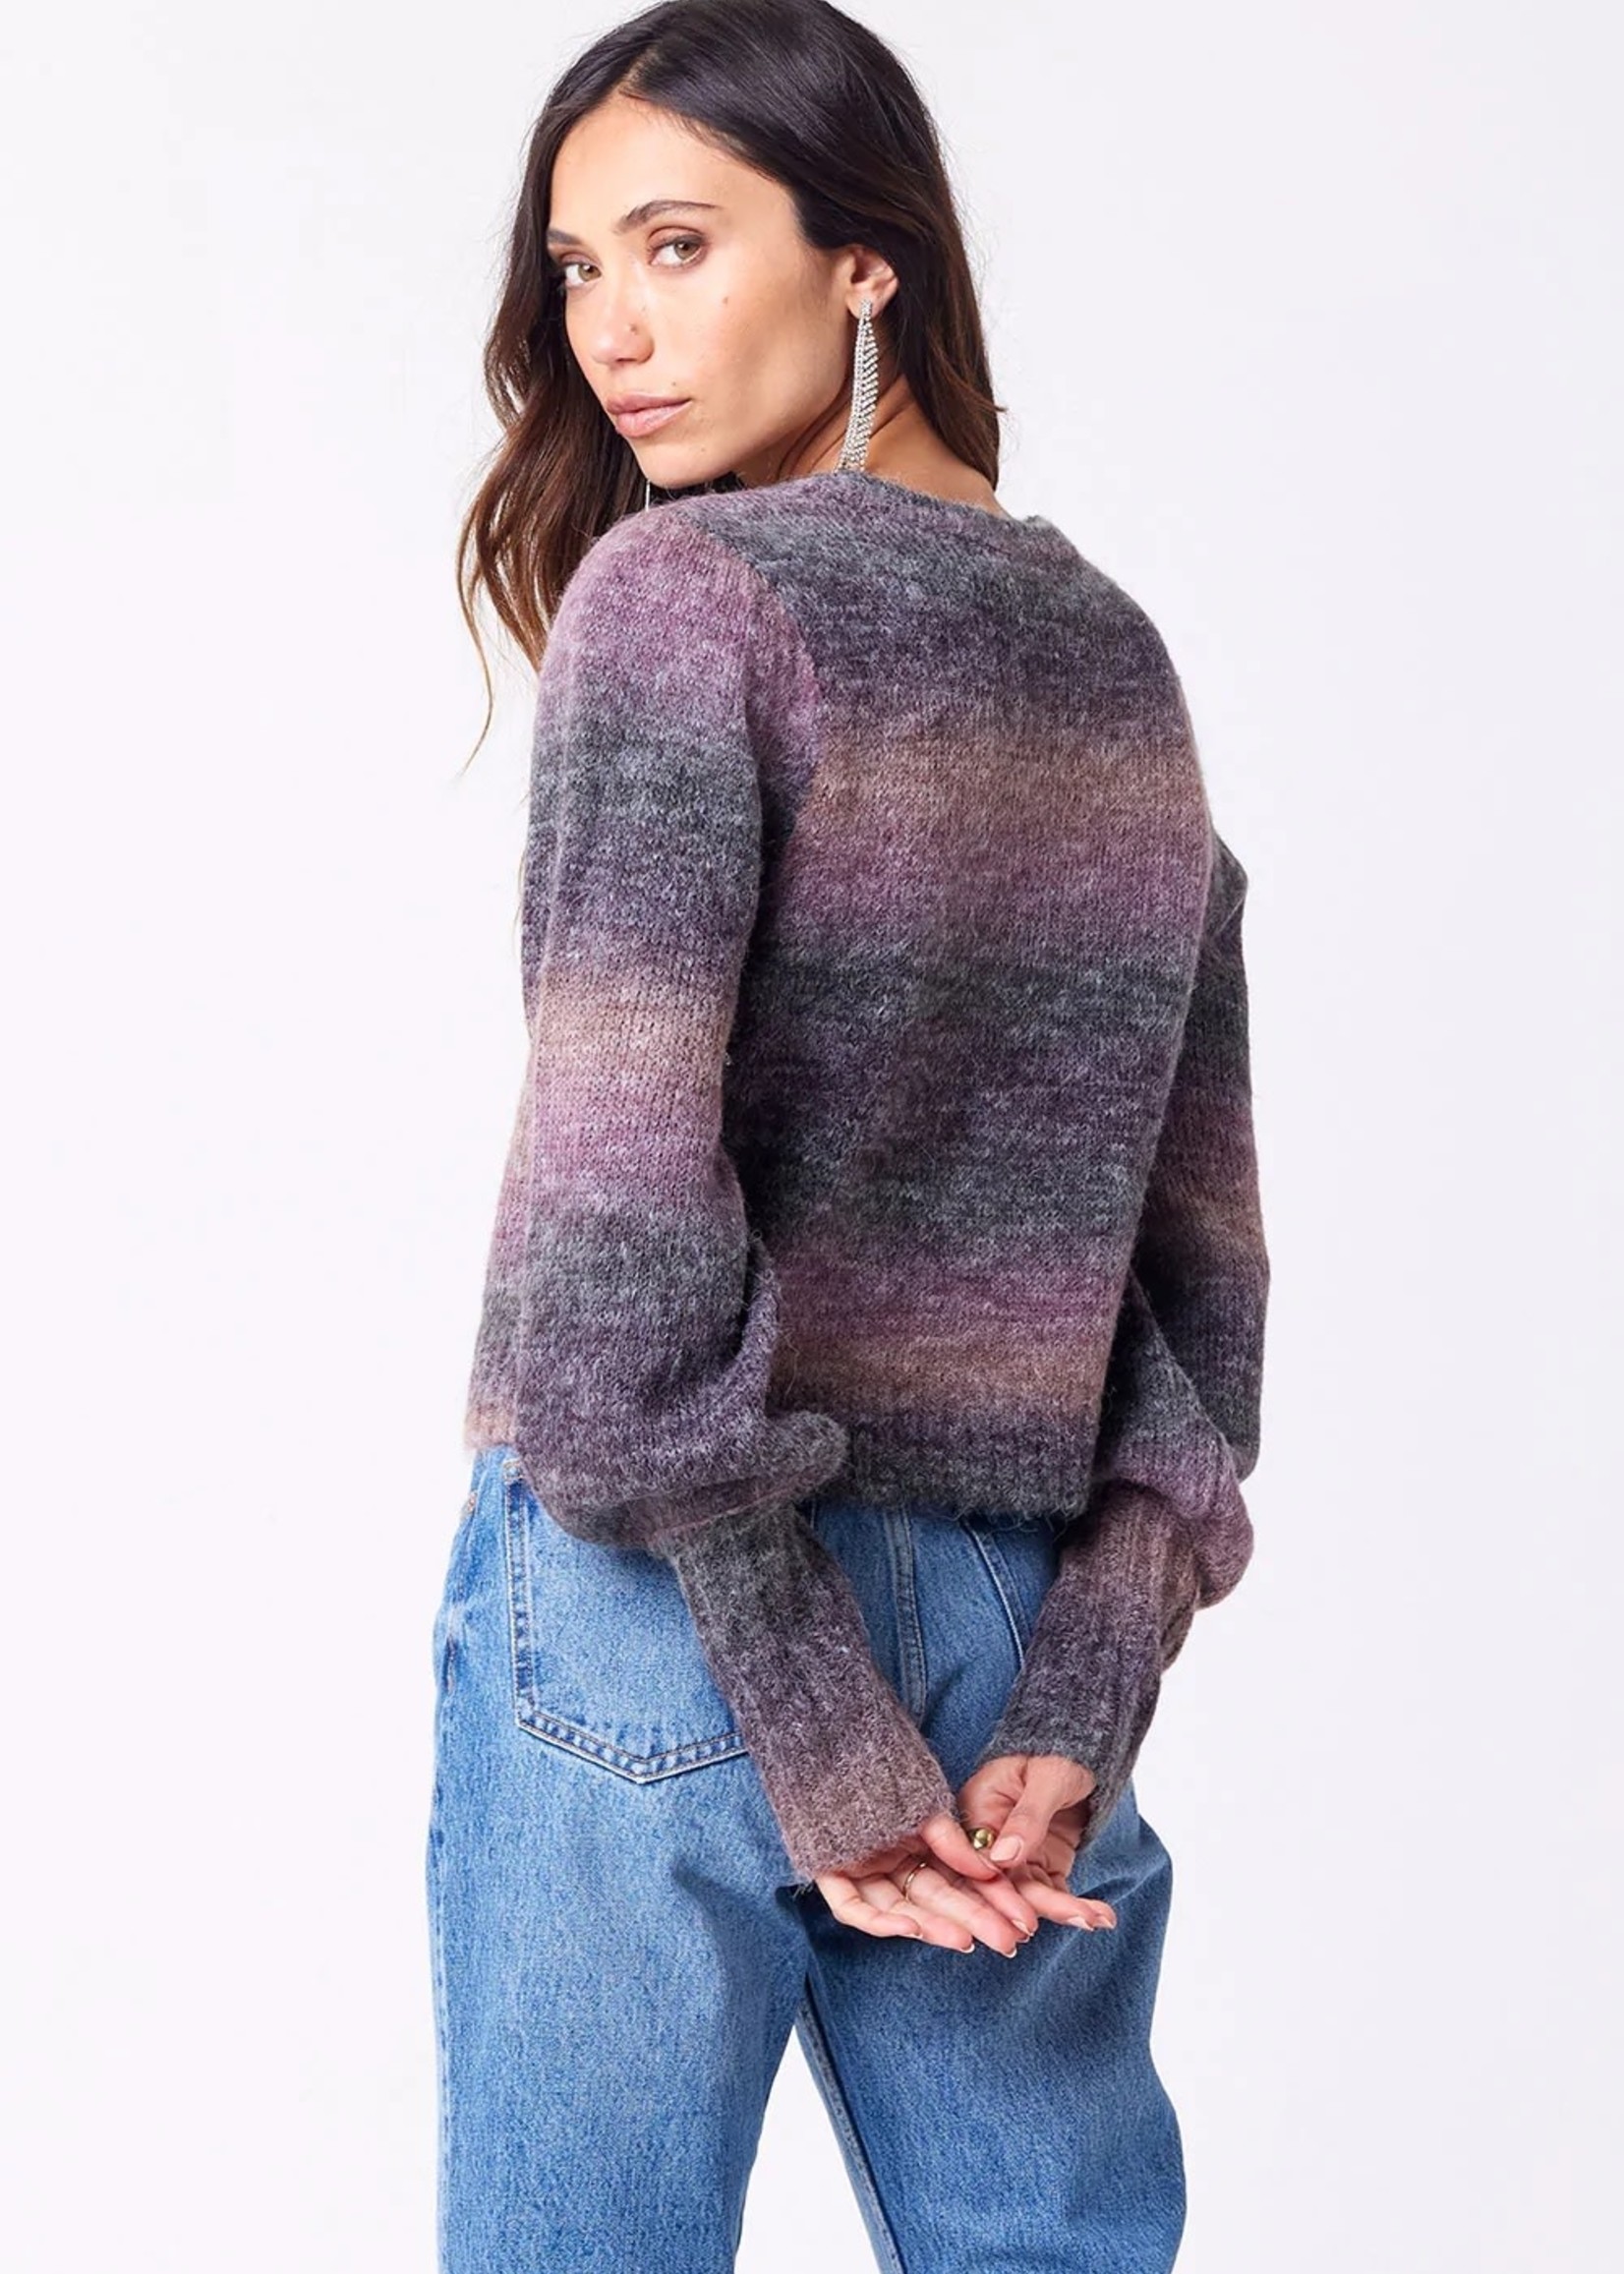 Saltwater Luxe Dollie Sweater